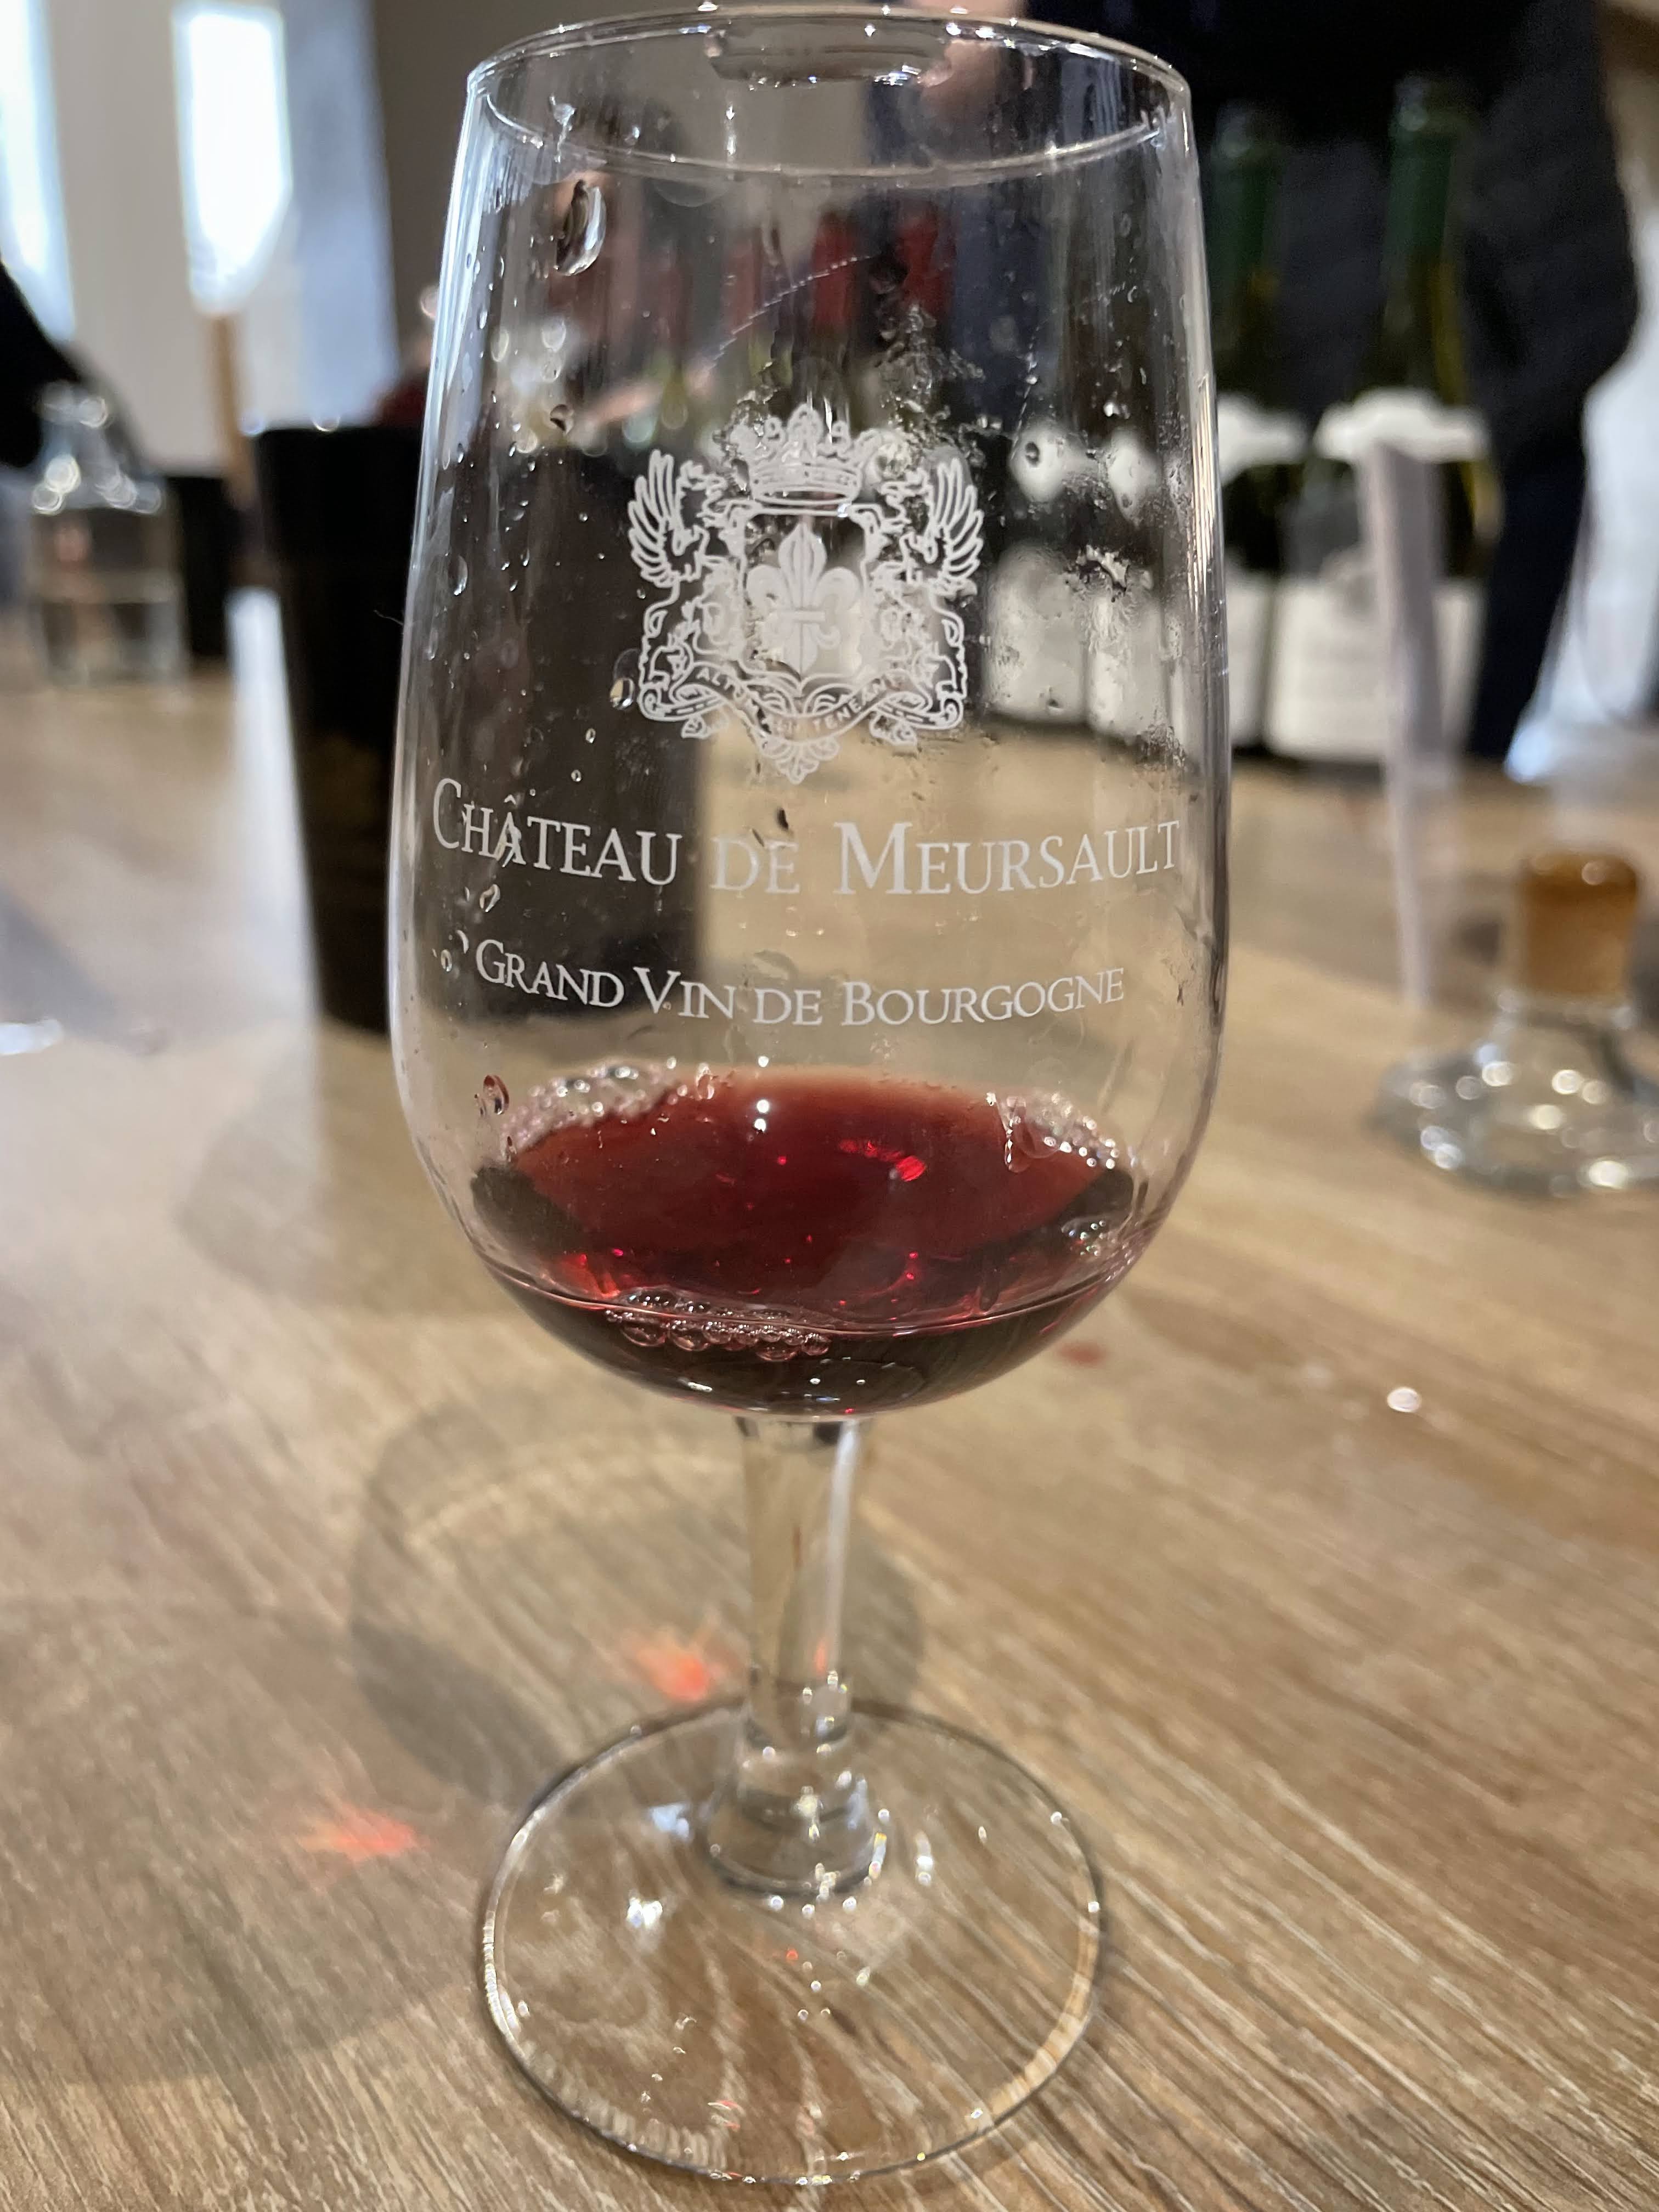 A wine glass with an engraving saying "Chateau de Meursault" holding red wine